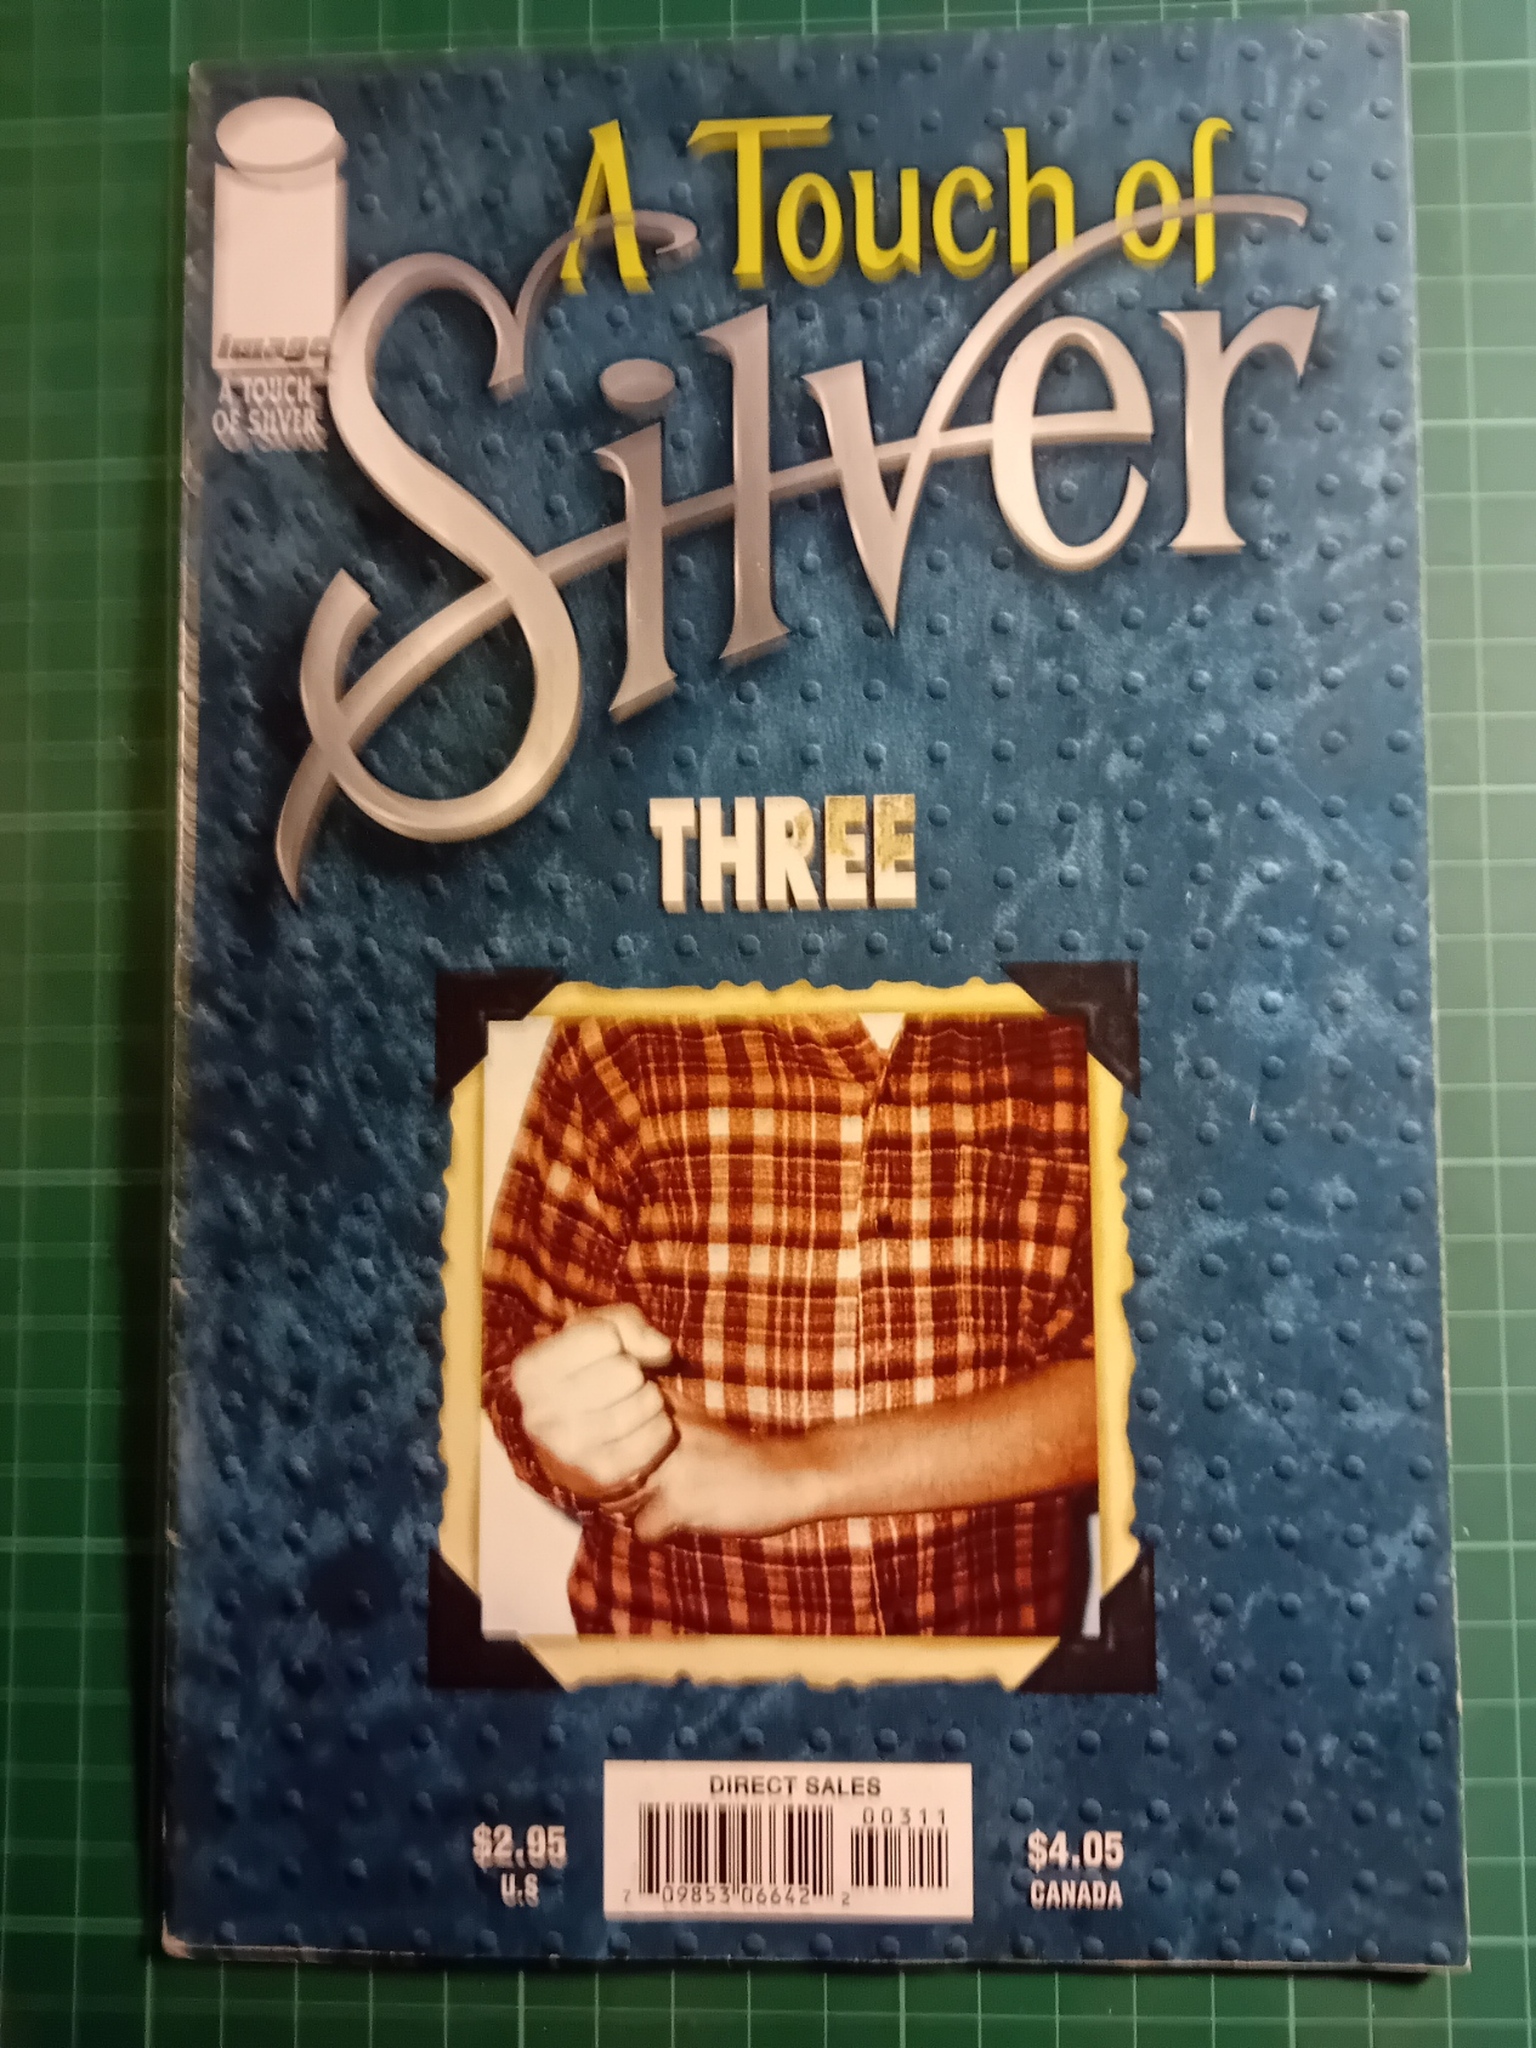 A touch of silver Three